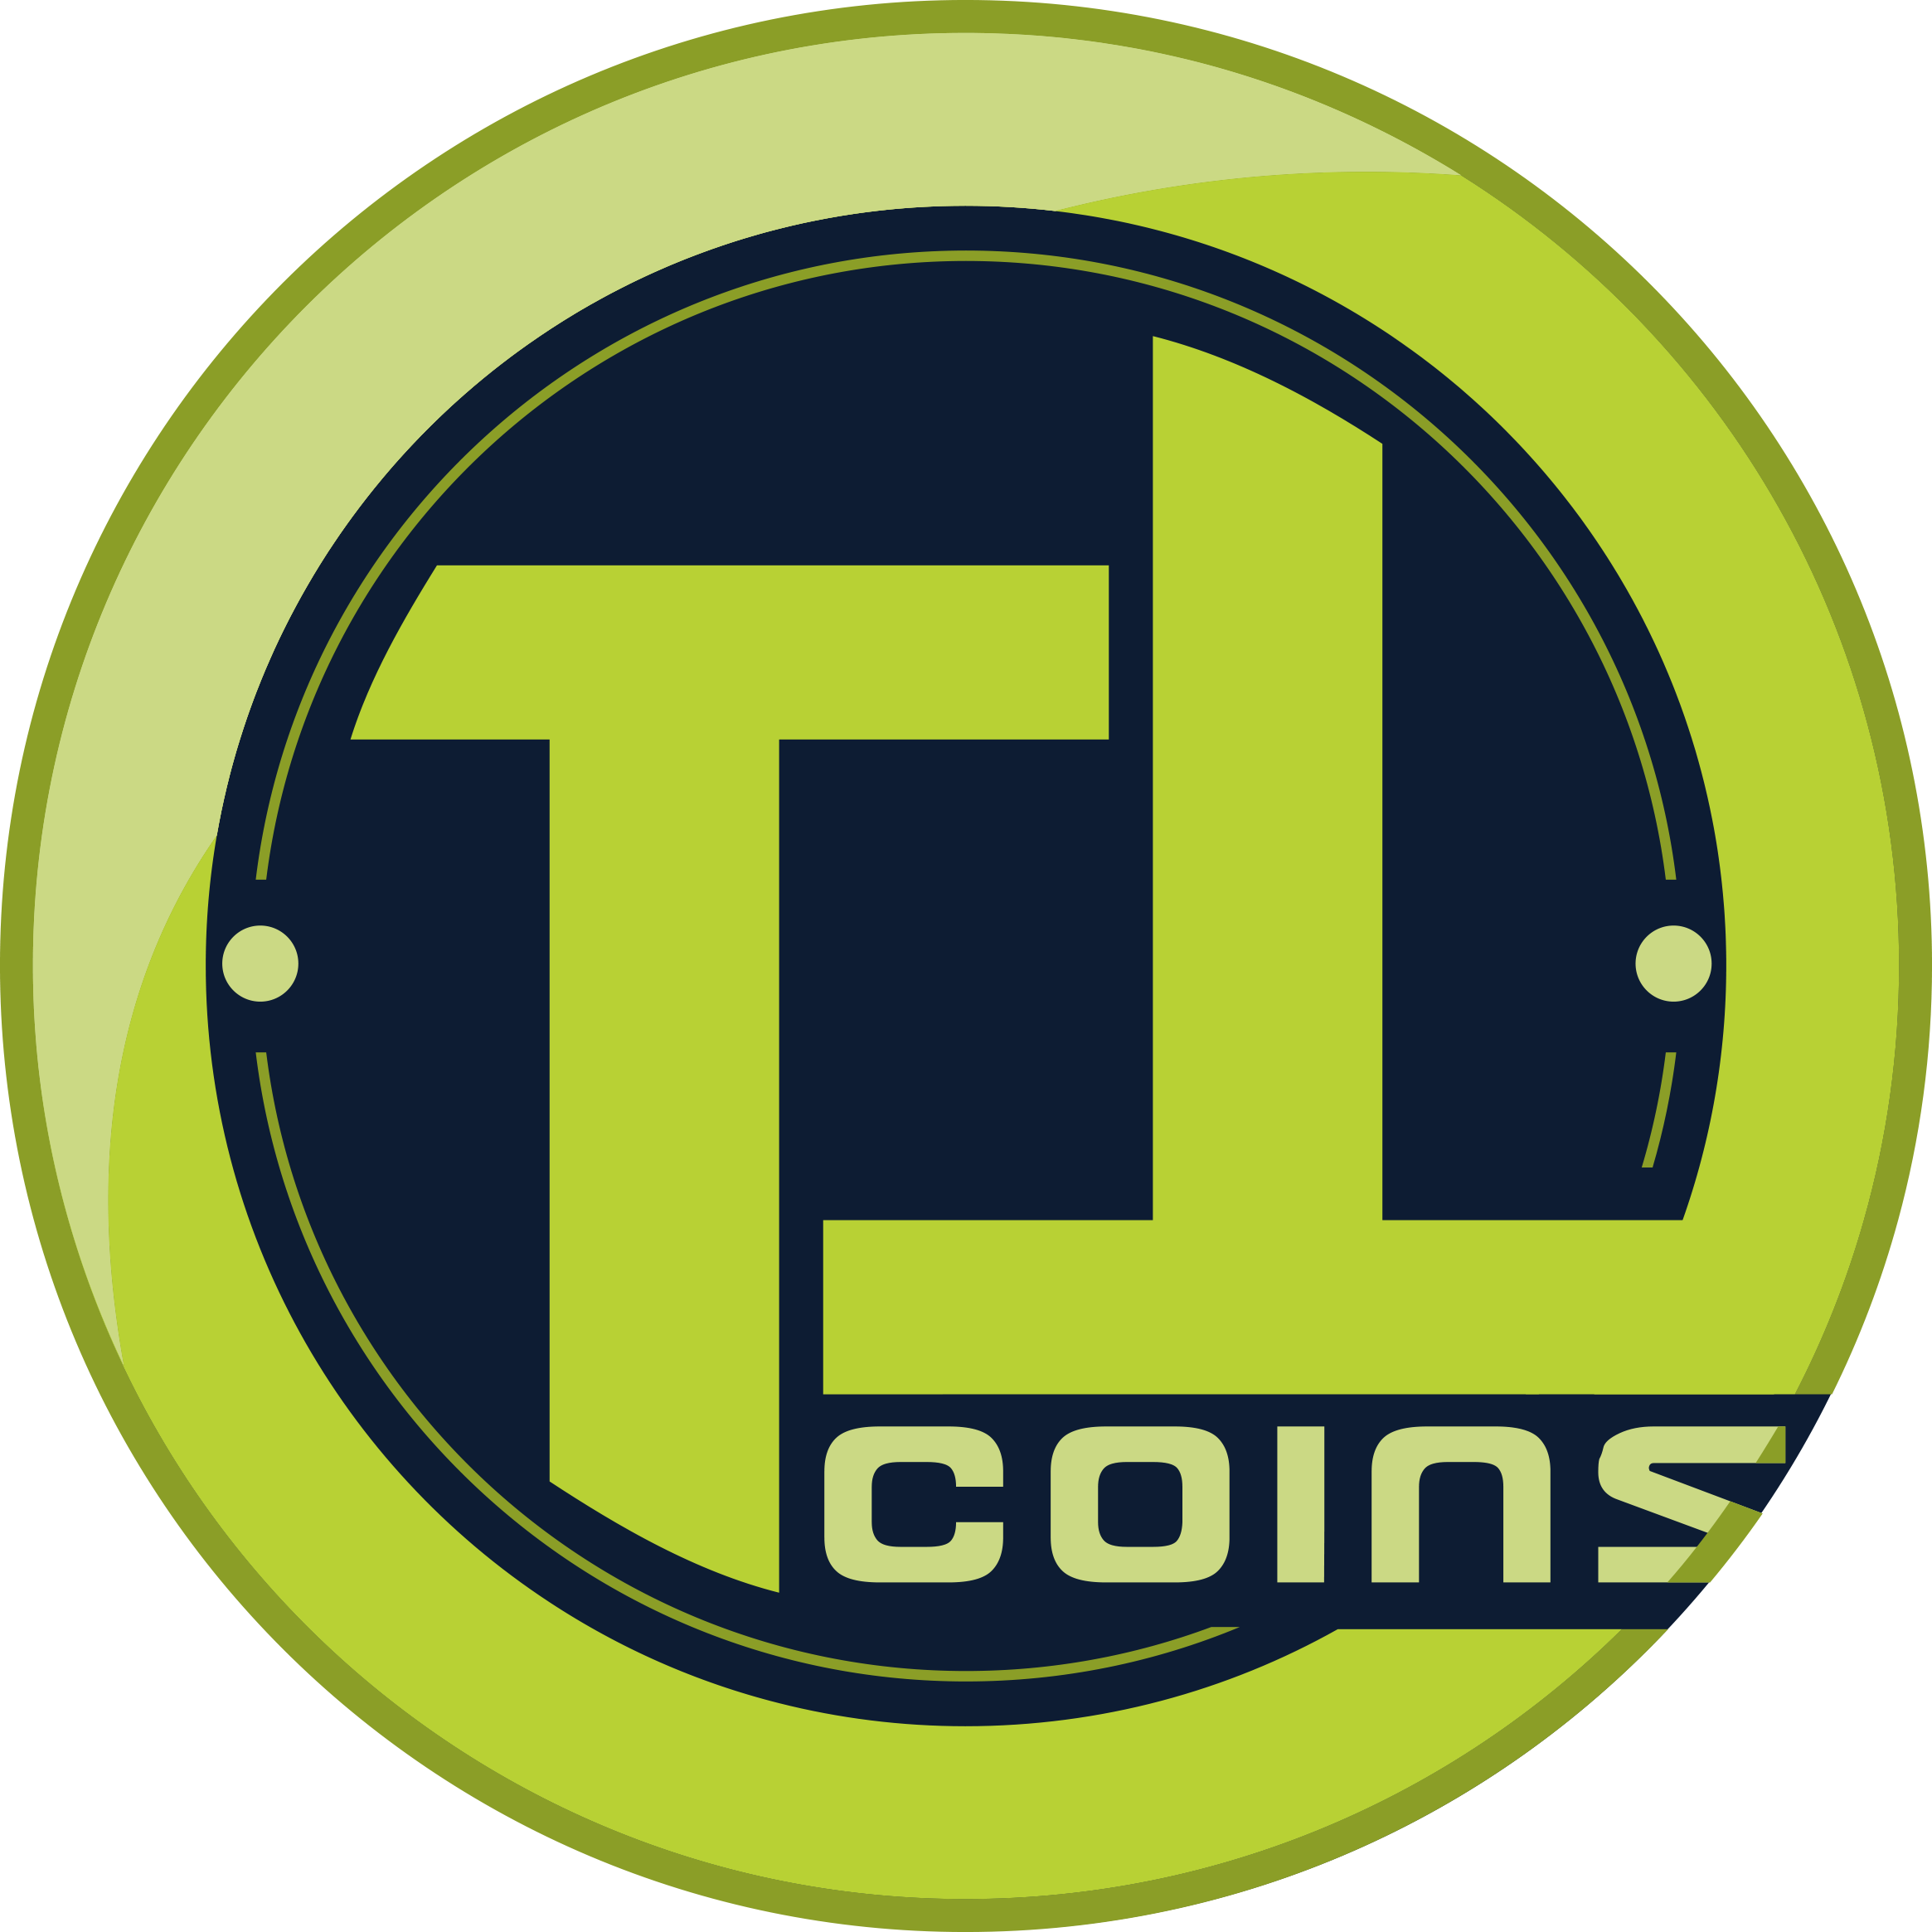 The Trader Coins